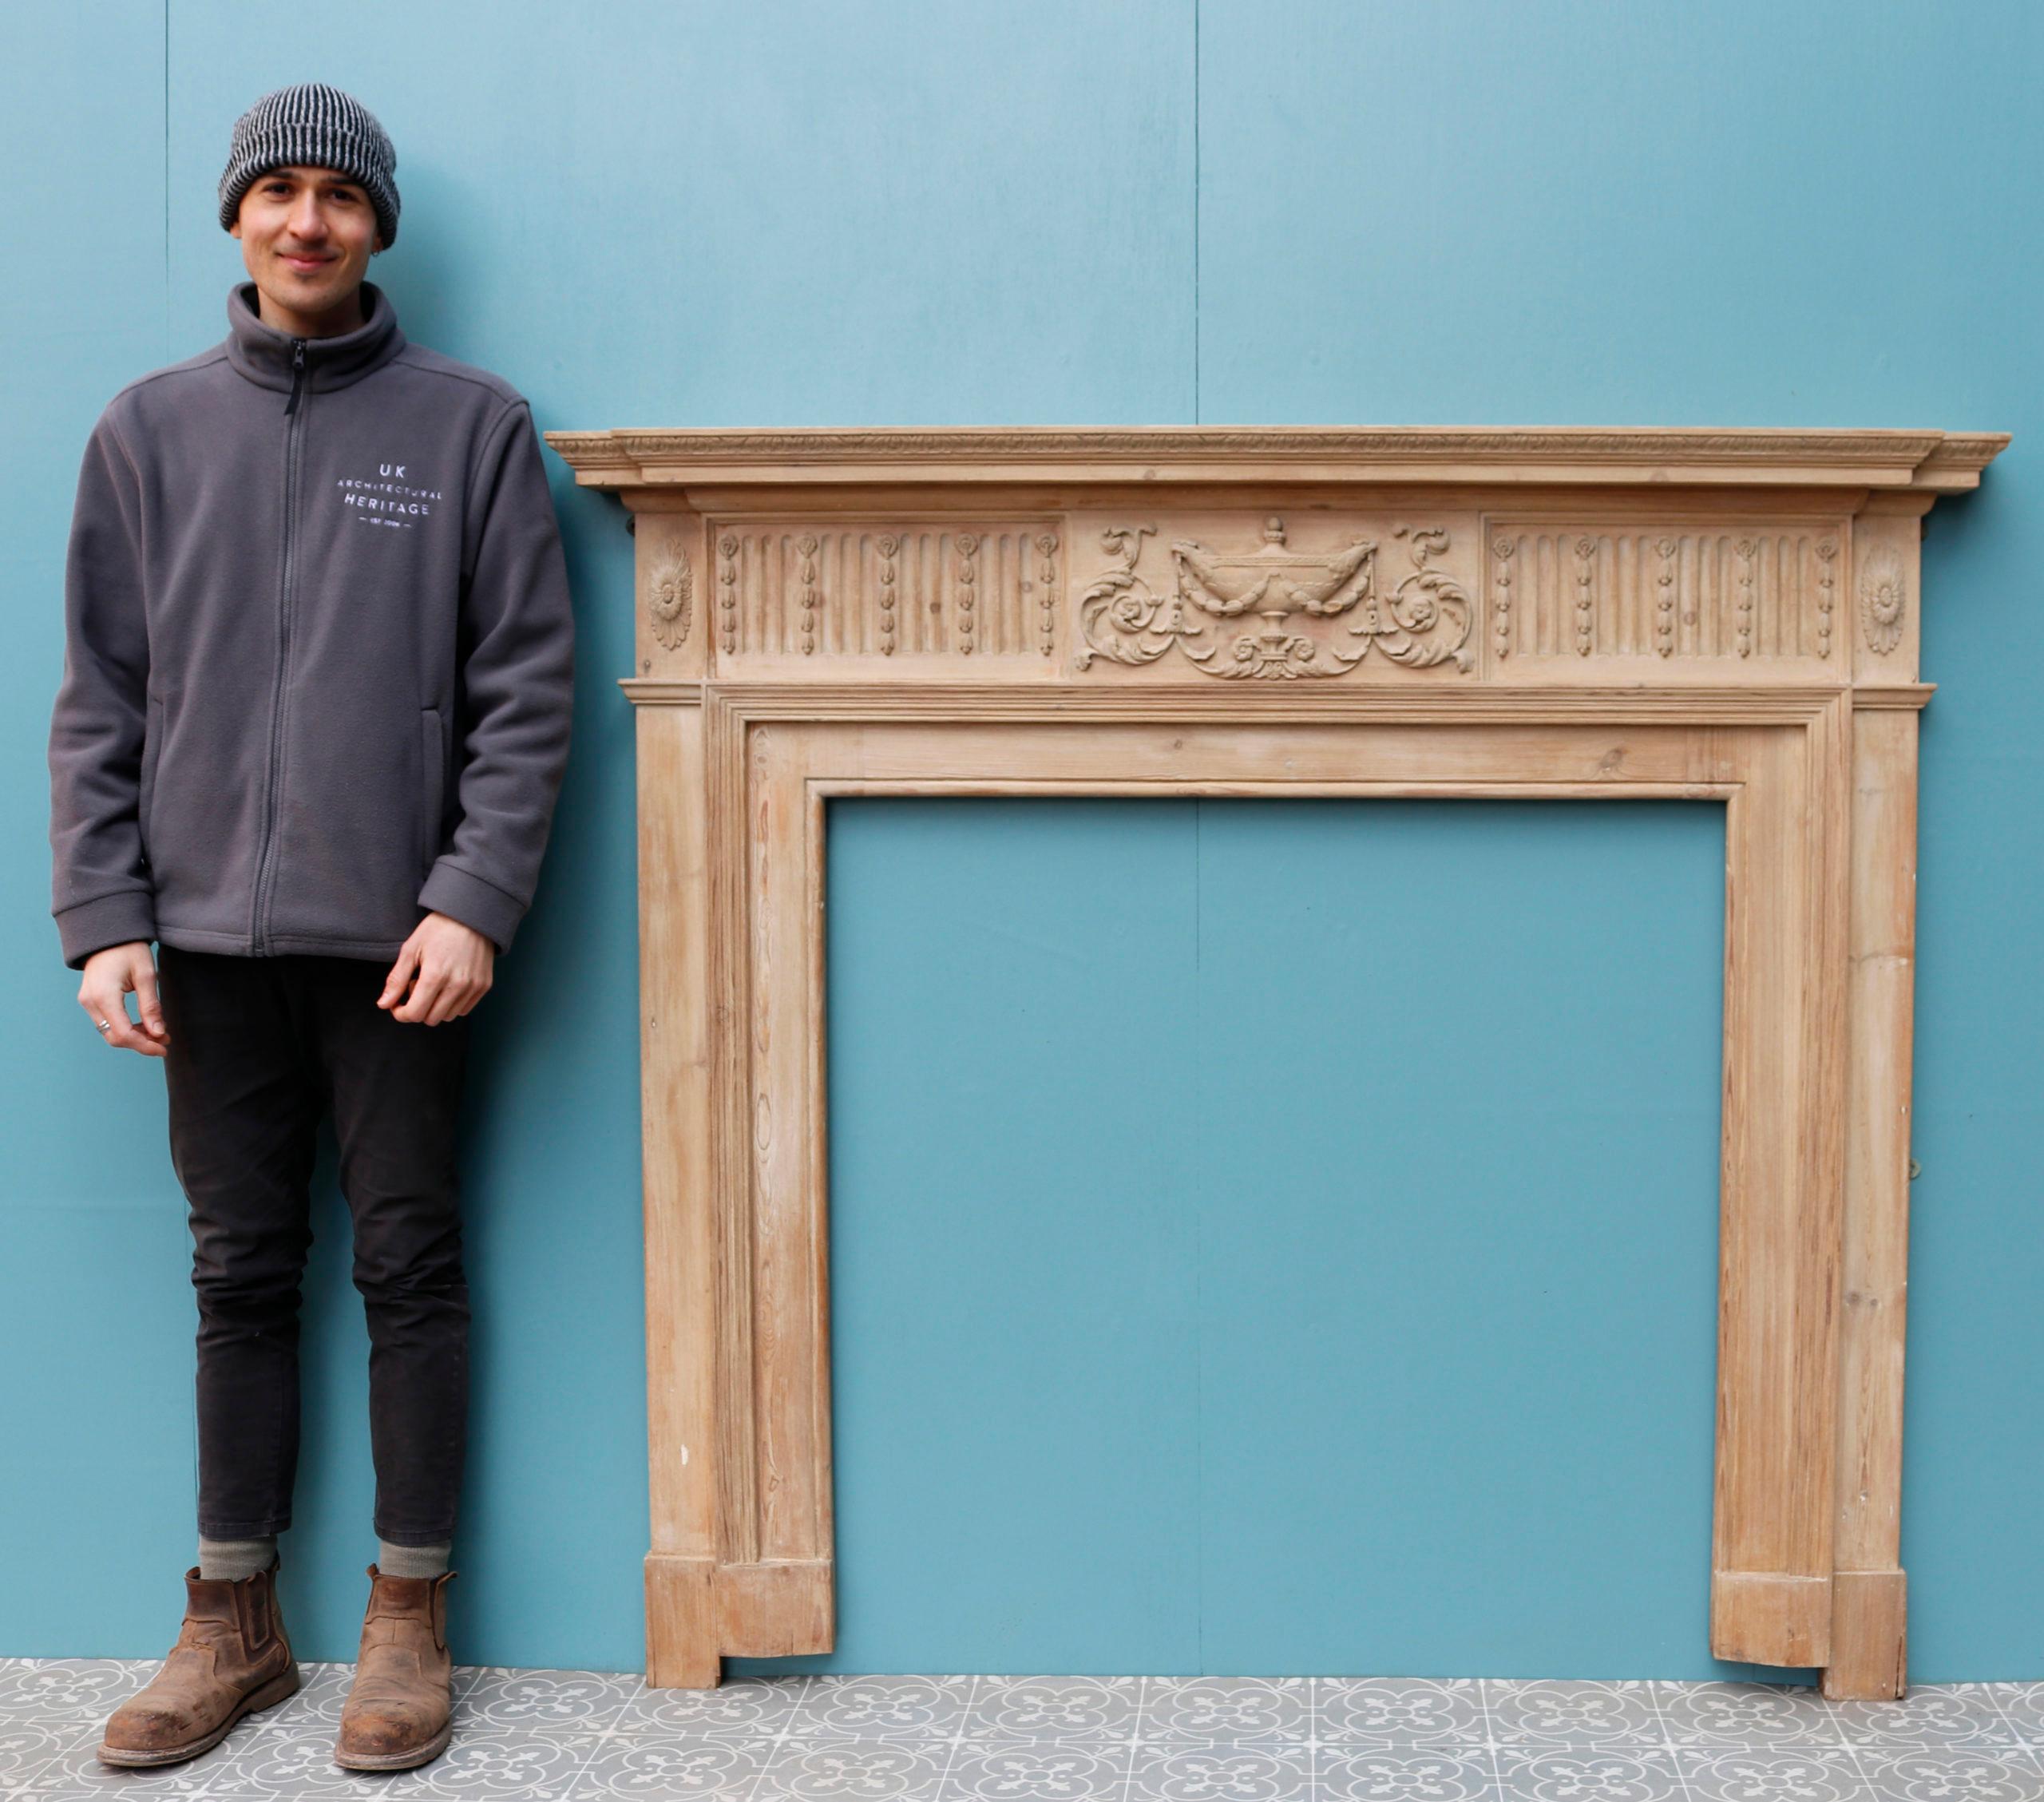 A 19th century pine fire mantel with a carved frieze depicting urns and foliage.

Opening Height 105.5 cm (41.53 in)
Opening Width 103.5 cm (40.74 in)
Width between outsides of the foot blocks 148.5 cm (58.46 in)